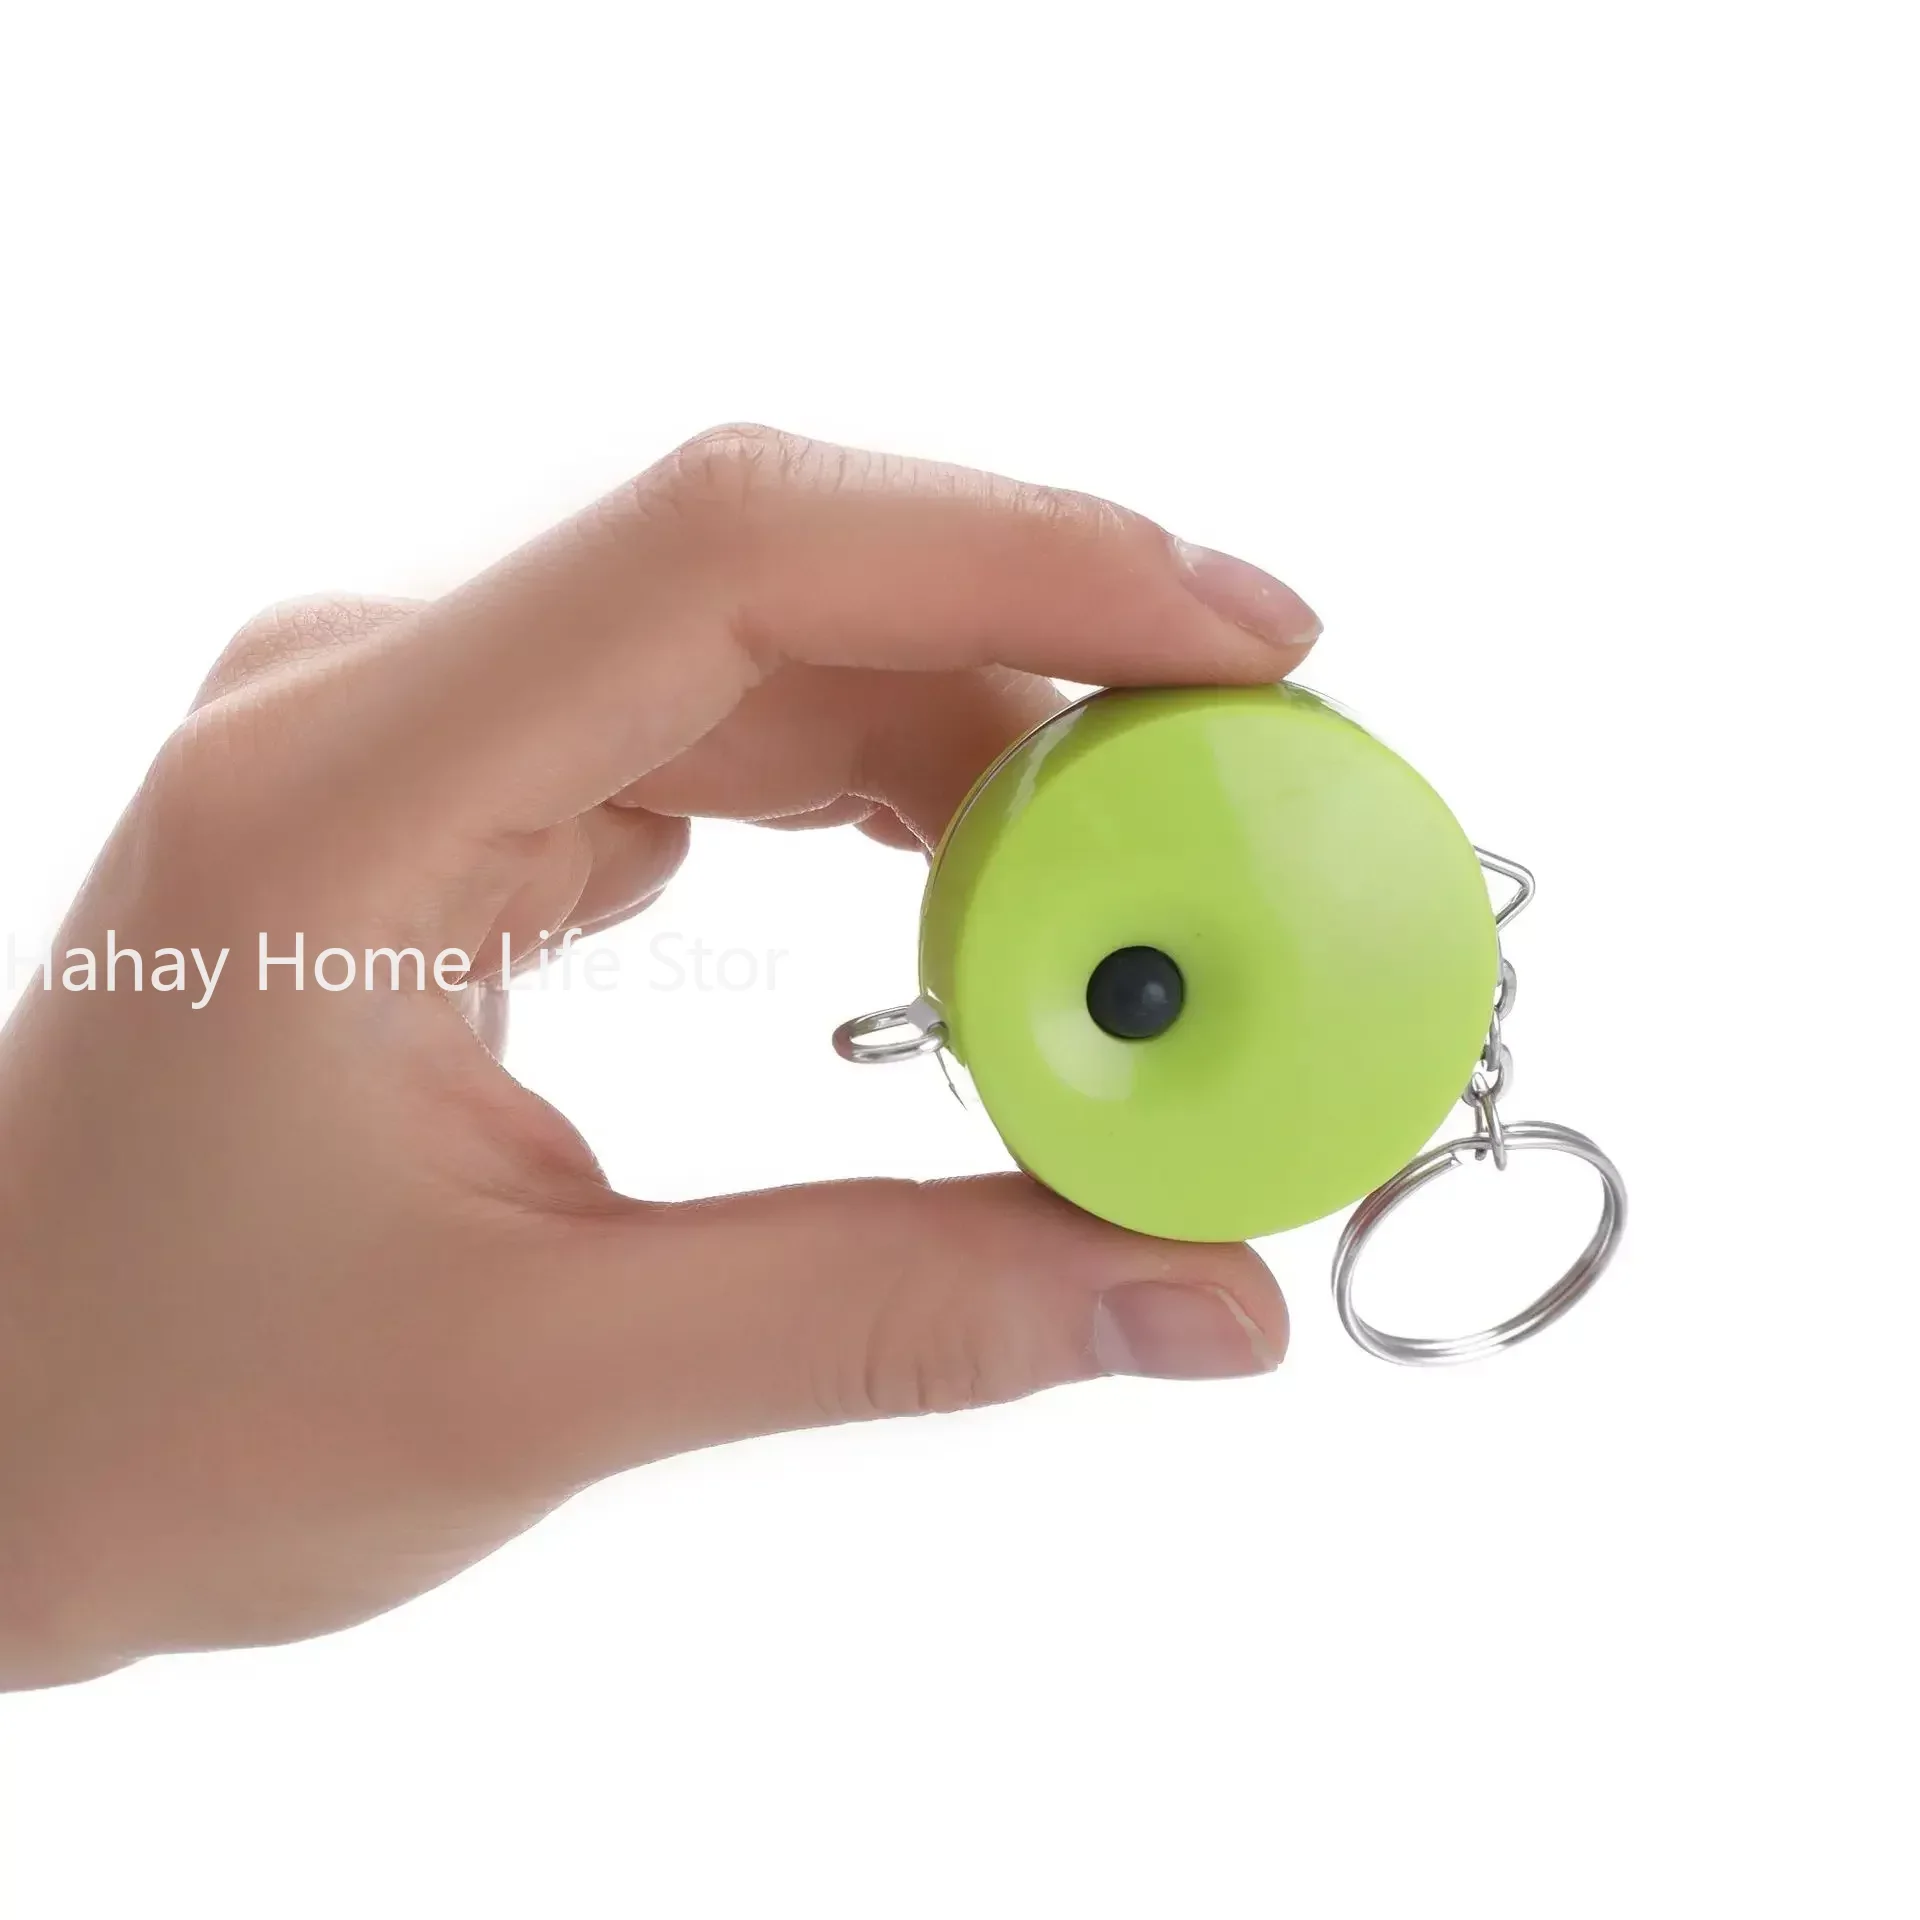 Practical Candy Color Keychain Tape Measure 1.5 Meters Quantity Clothing Size Tape Measure Small Tape Measure